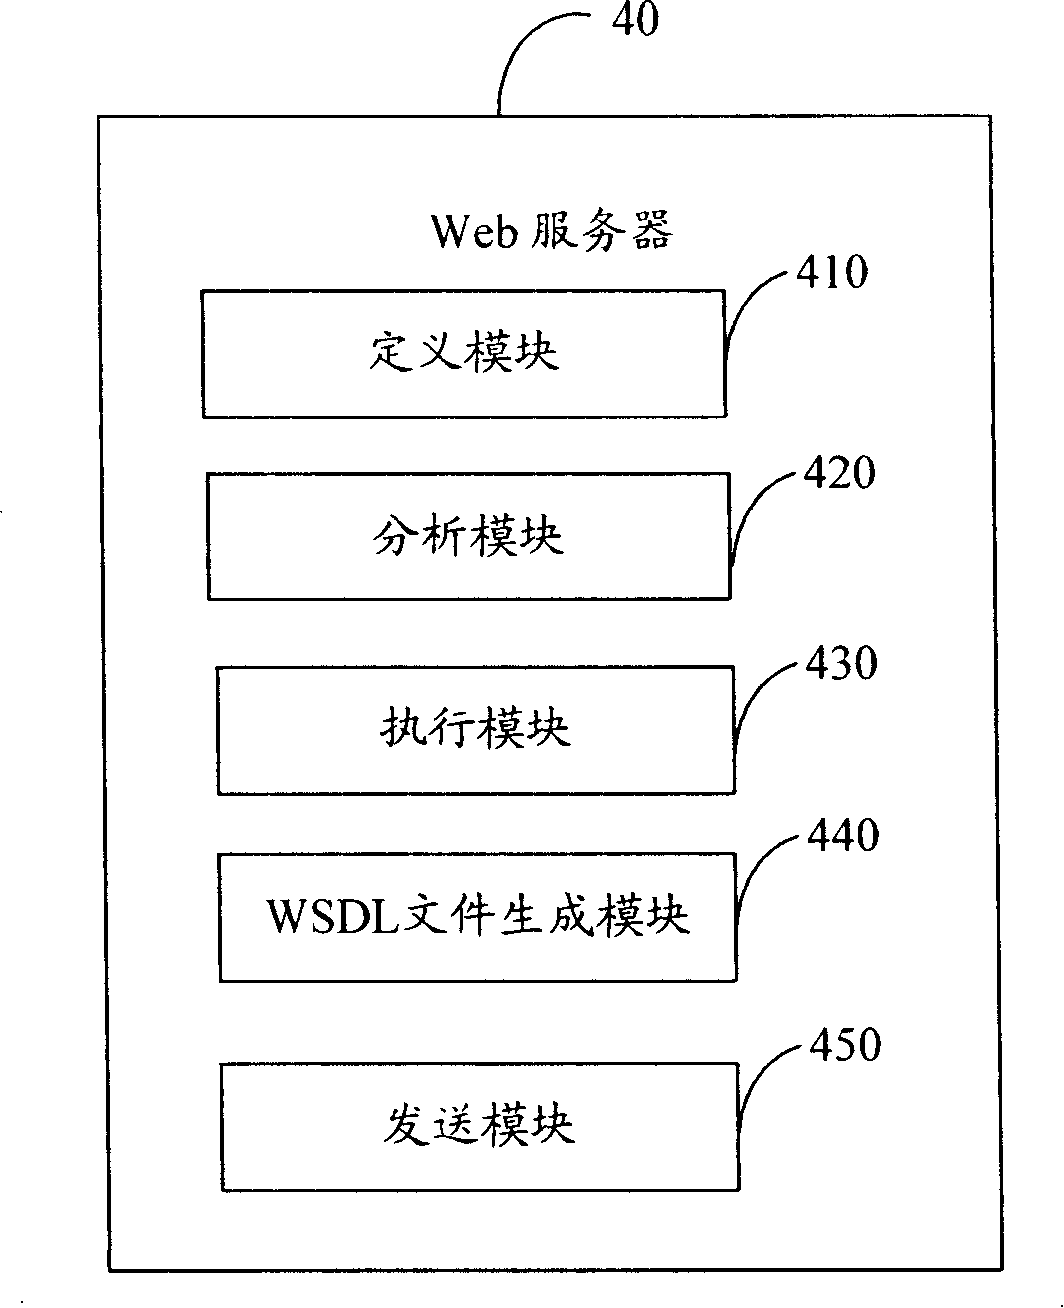 Network service generating system and method